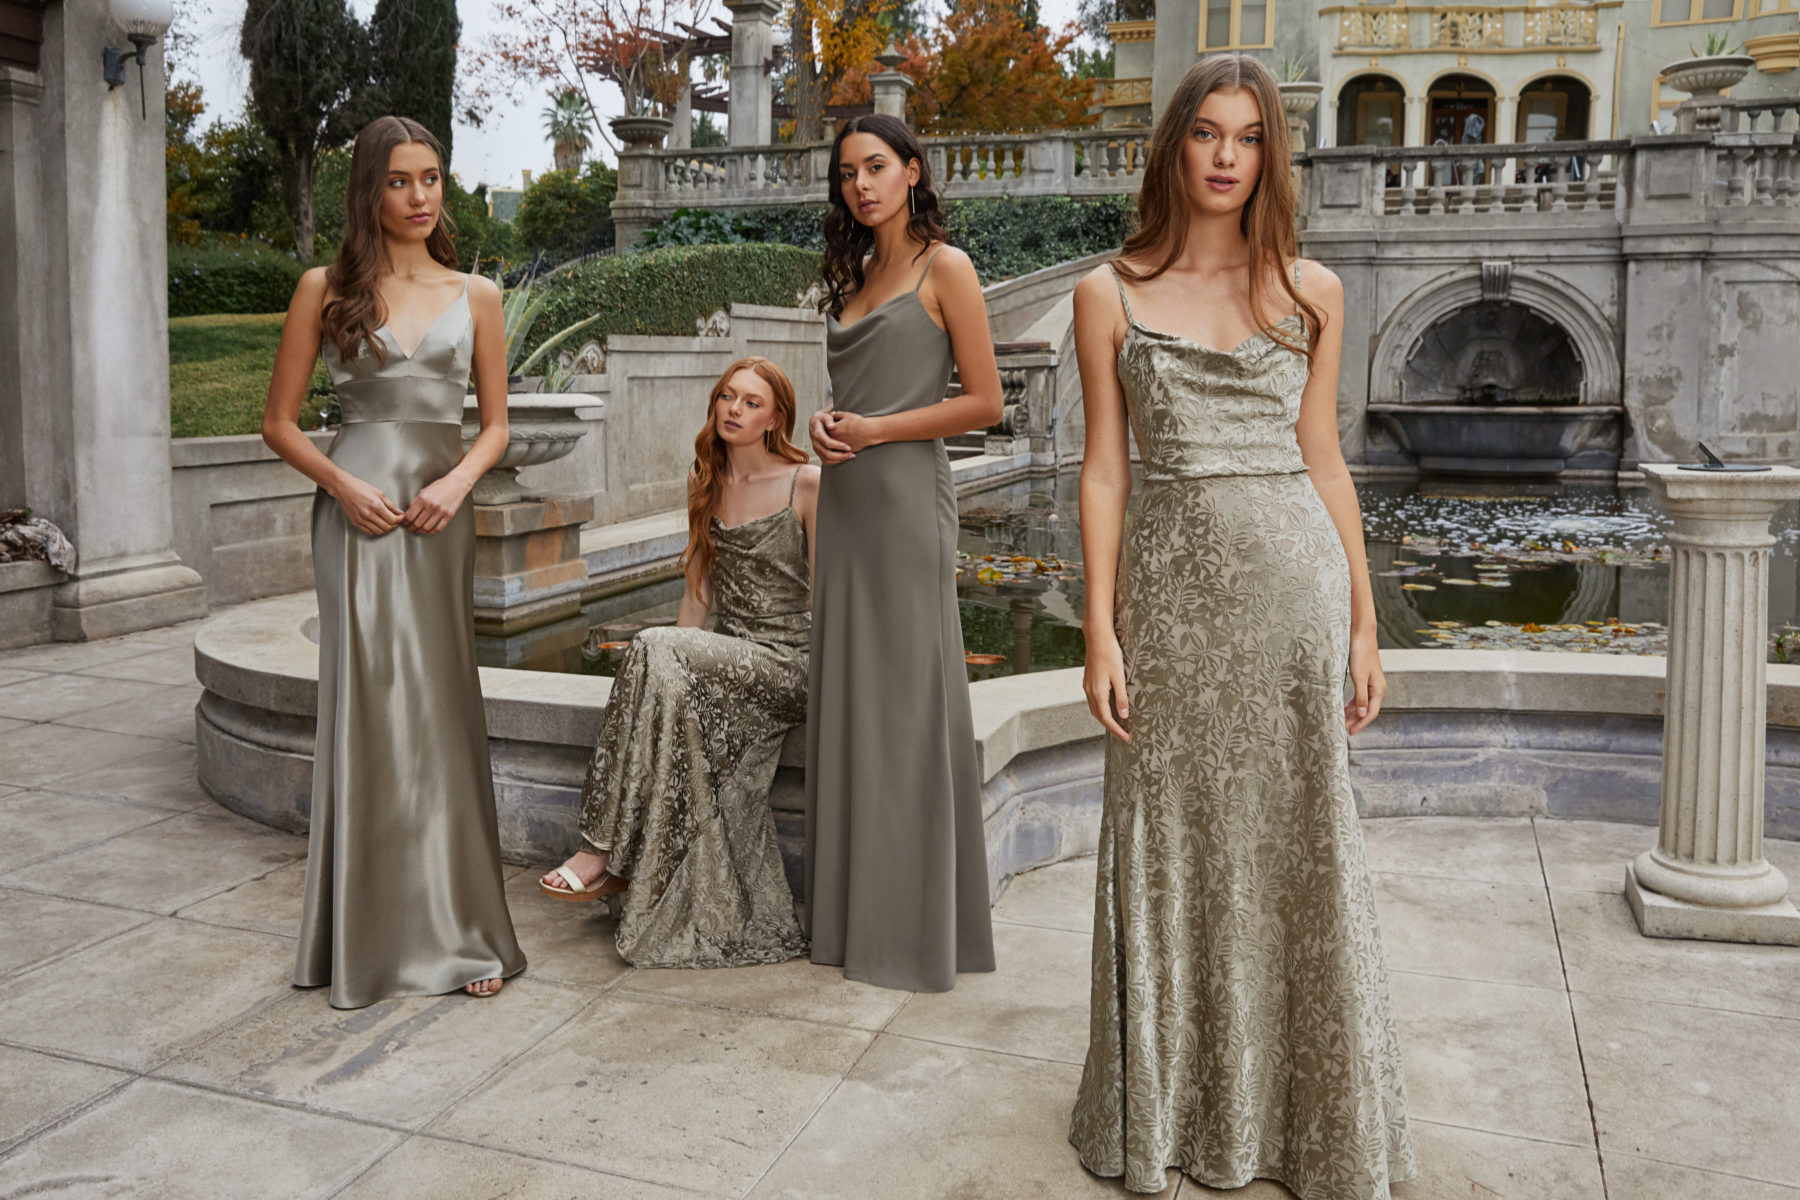 New Bridesmaid Dress Styles for 2020 at Bella Bridesmaids featured on Nashville Bride Guide